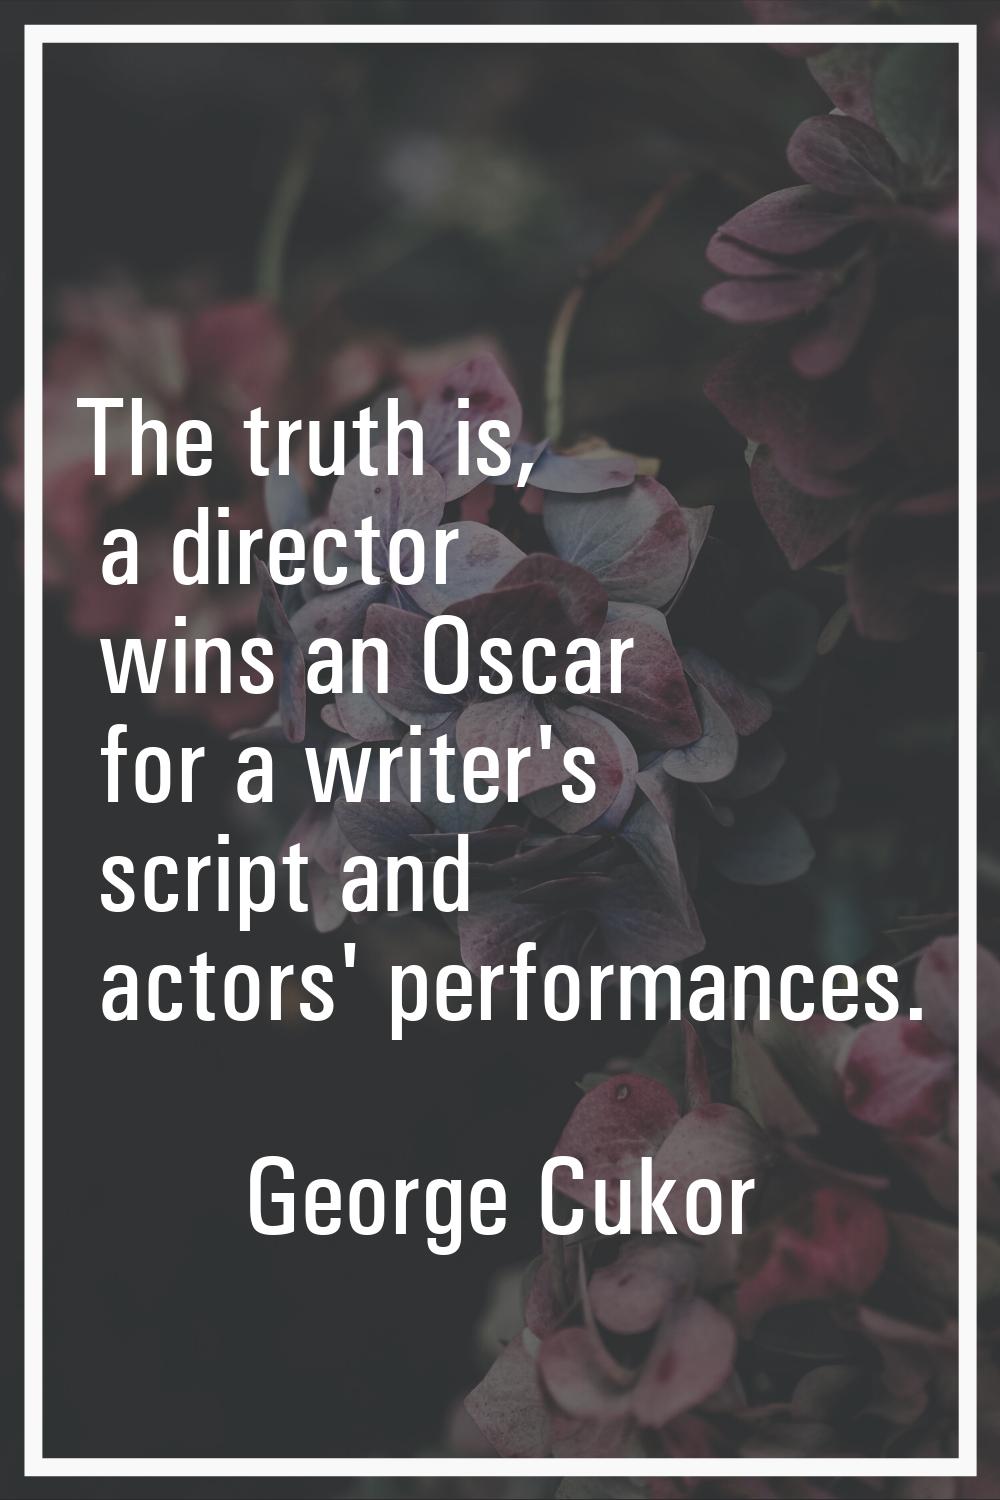 The truth is, a director wins an Oscar for a writer's script and actors' performances.